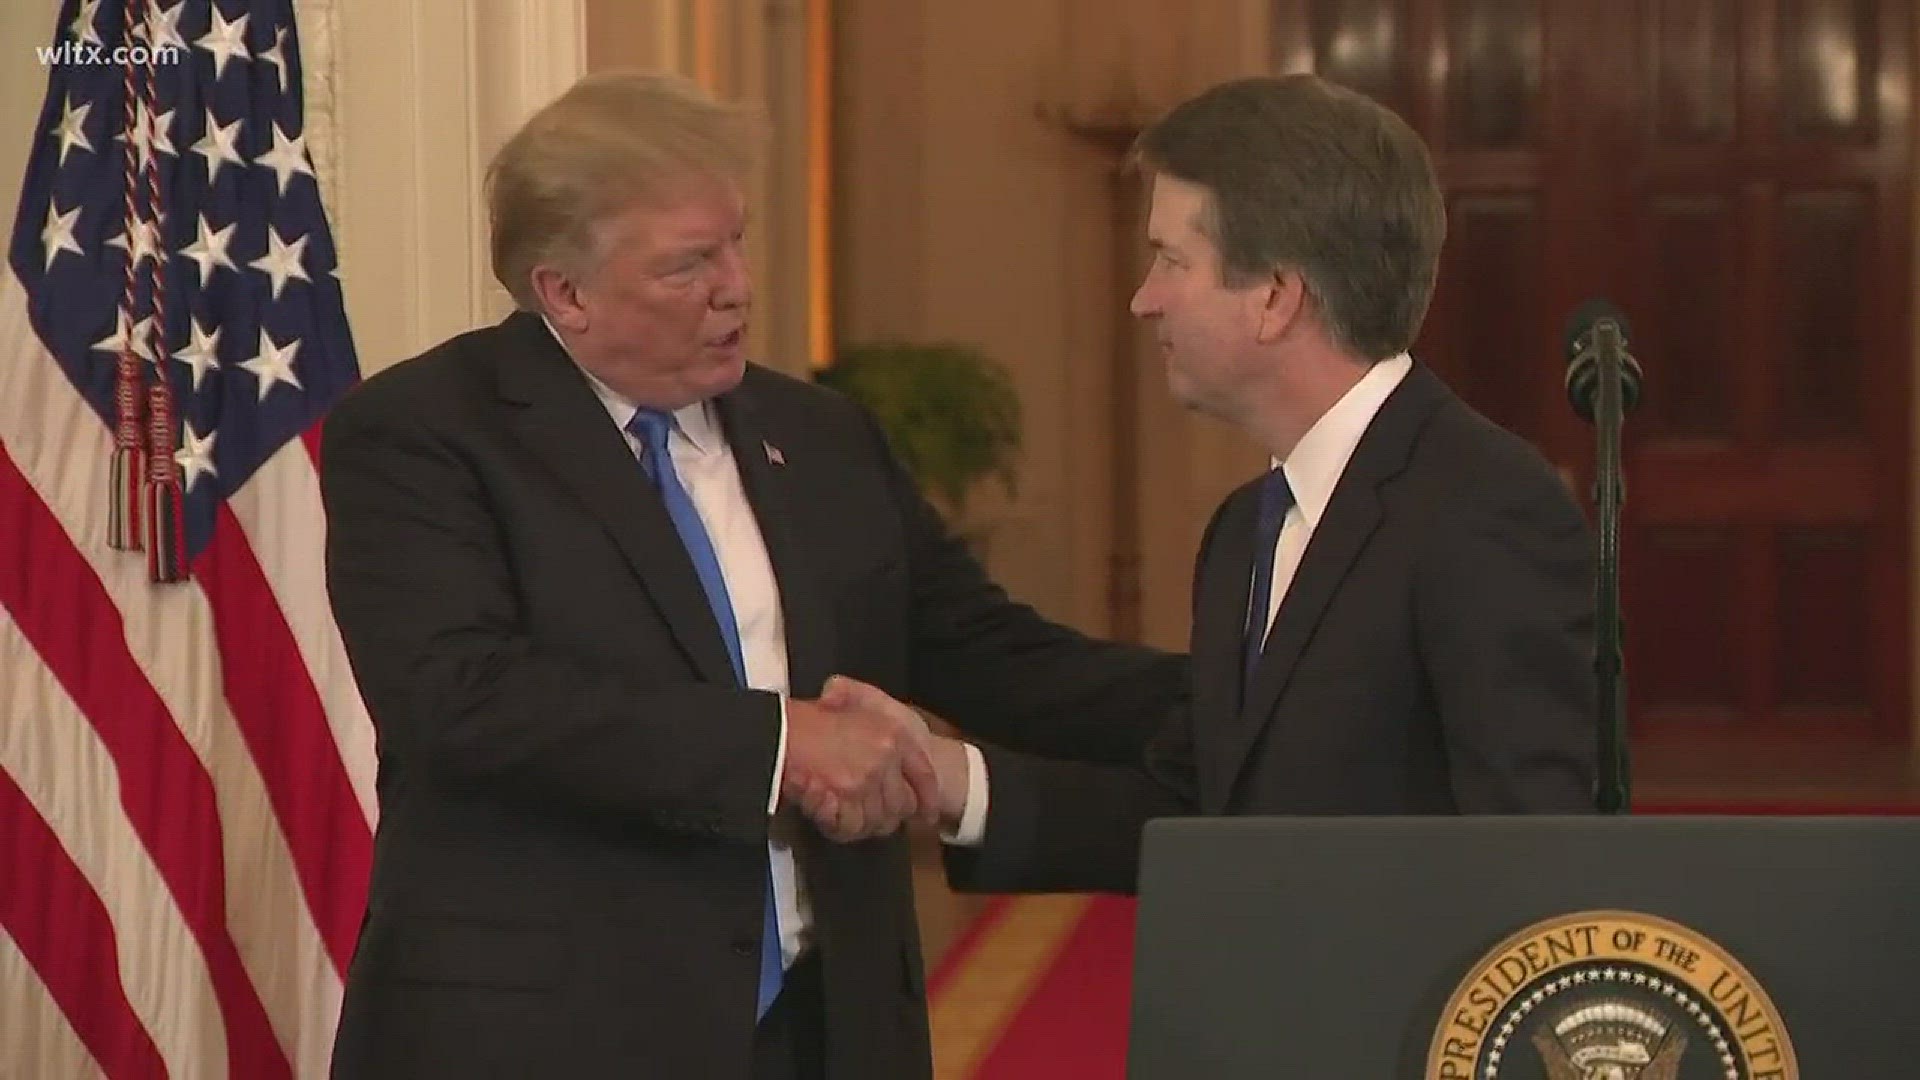 President Donald Trump has nominated Brett Kavanaugh to replace Justice Anthony Kennedy on the U.S. Supreme Court.